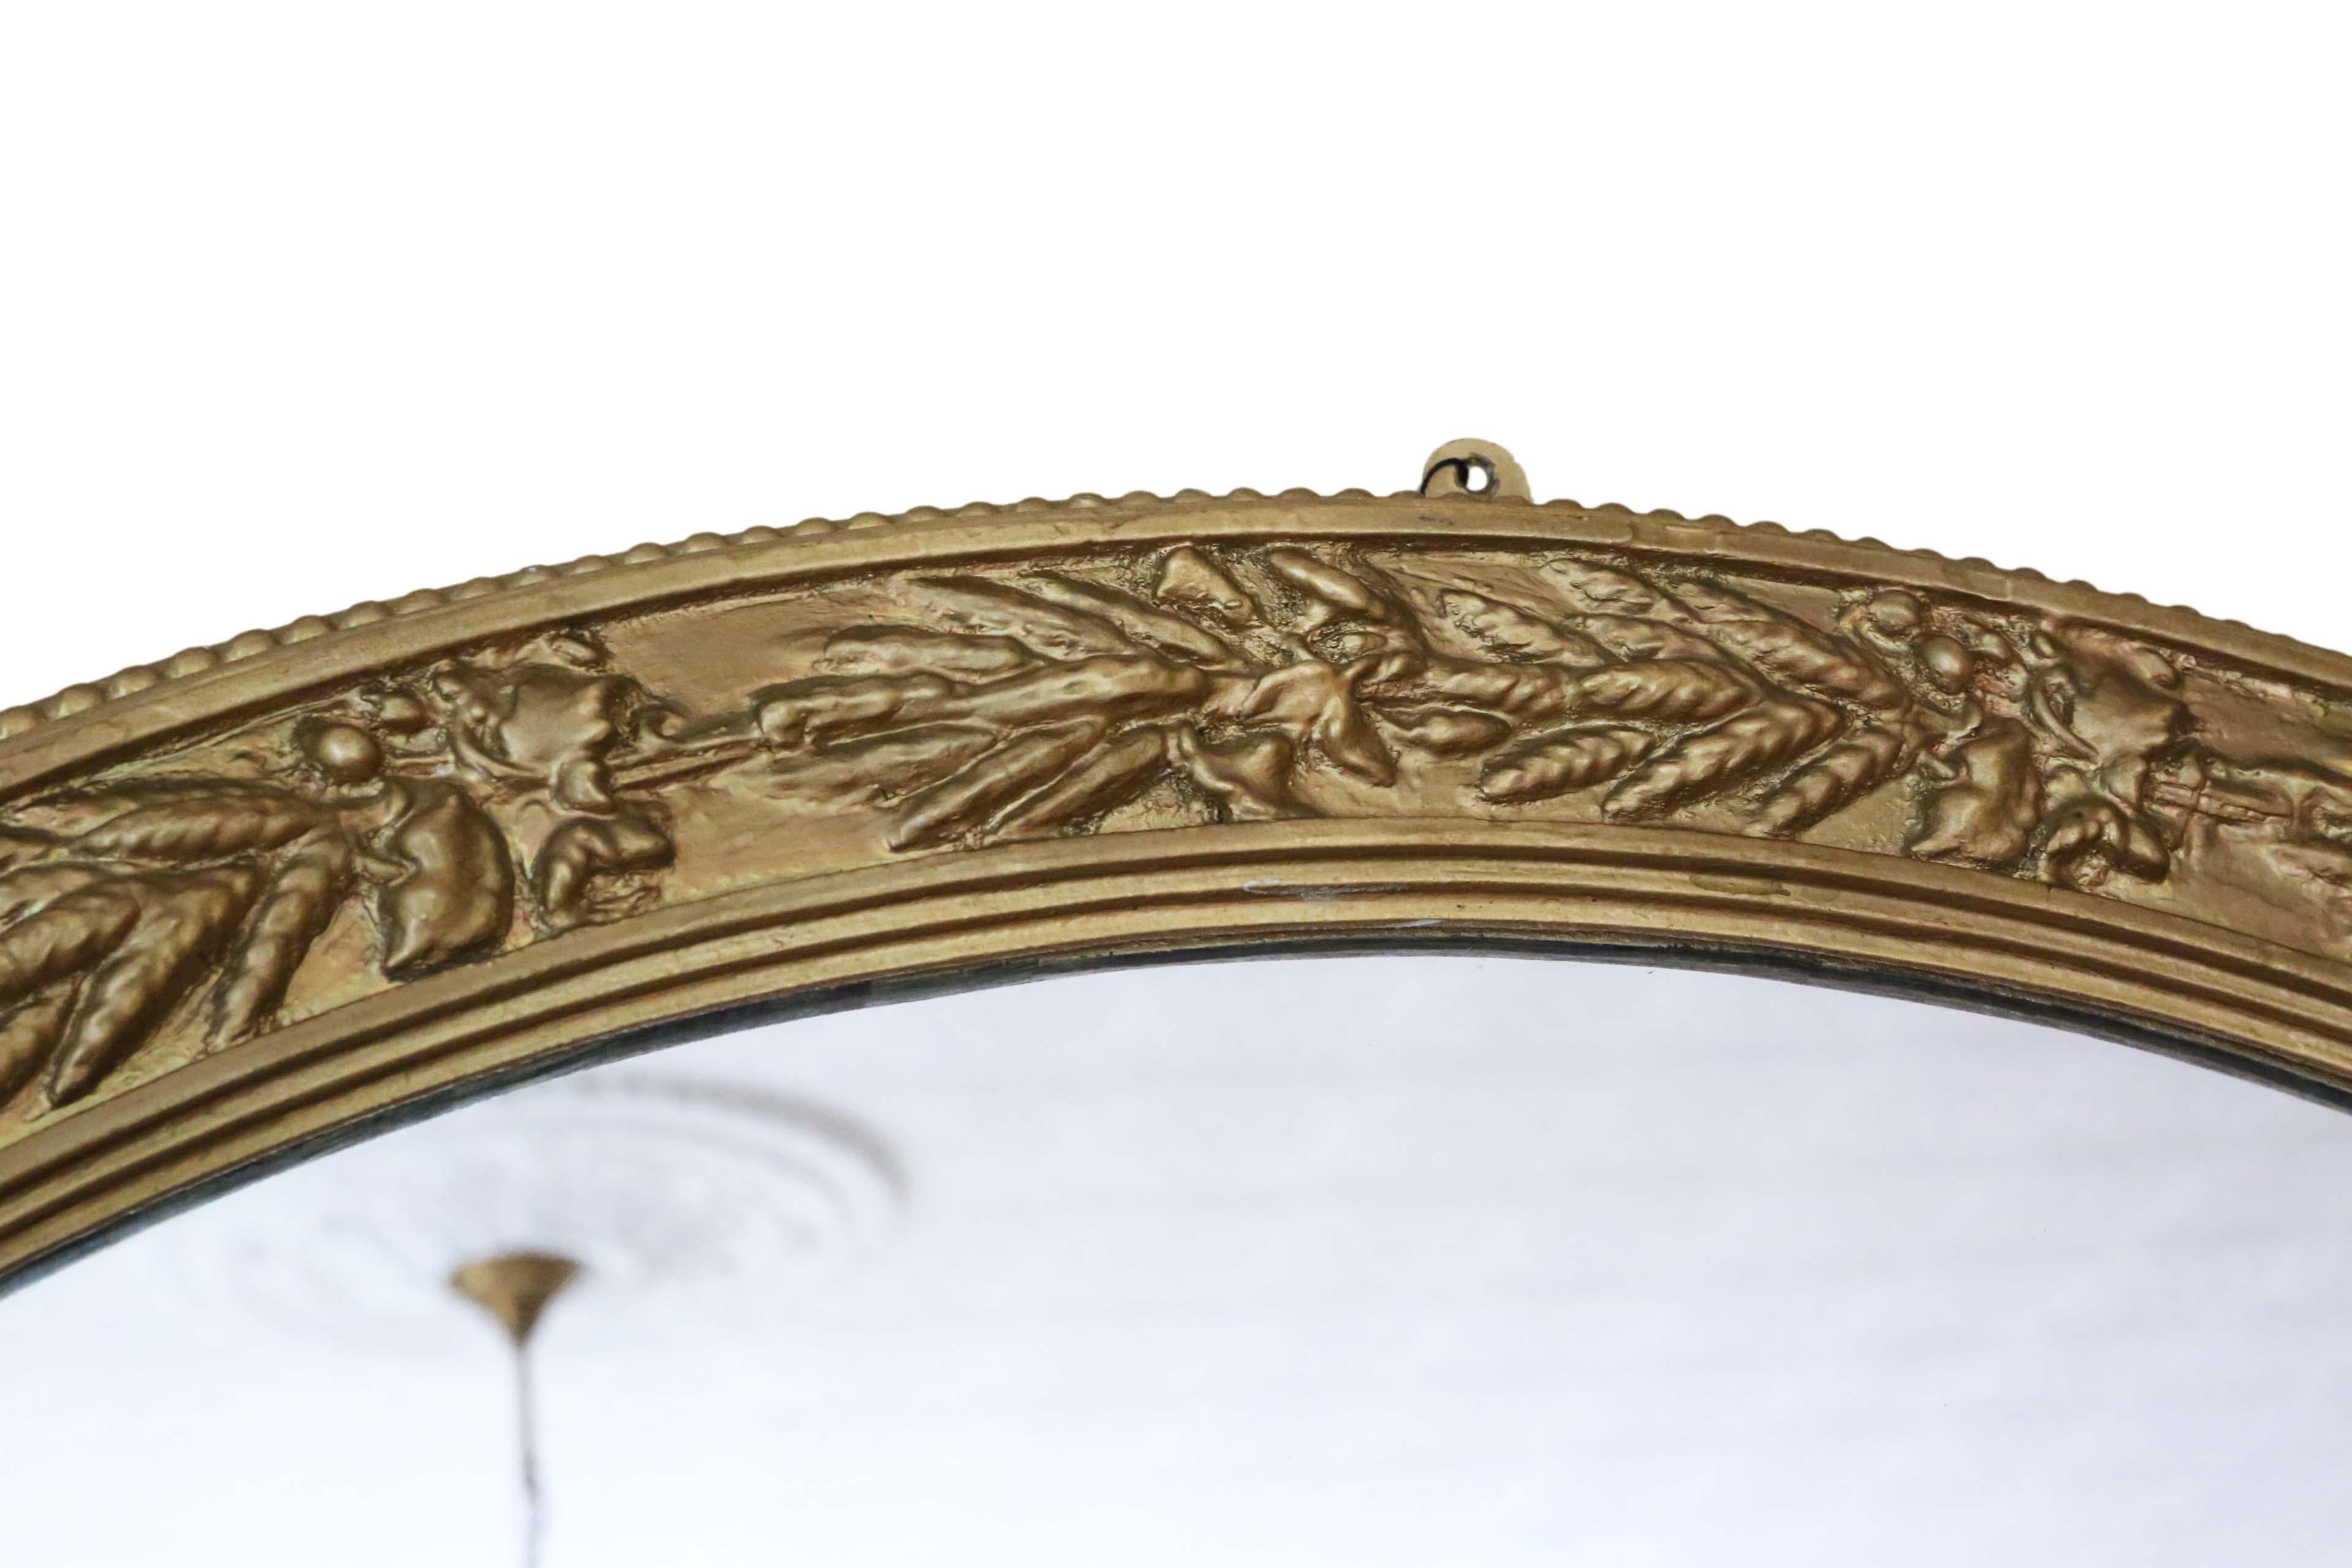 Antique large oval mid-19th century gilt overmantle wall mirror.
A charming mirror, that is full of age and character. The frame has some losses, which have been historically repainted then touched up over the years. No woodworm.
The mirrored